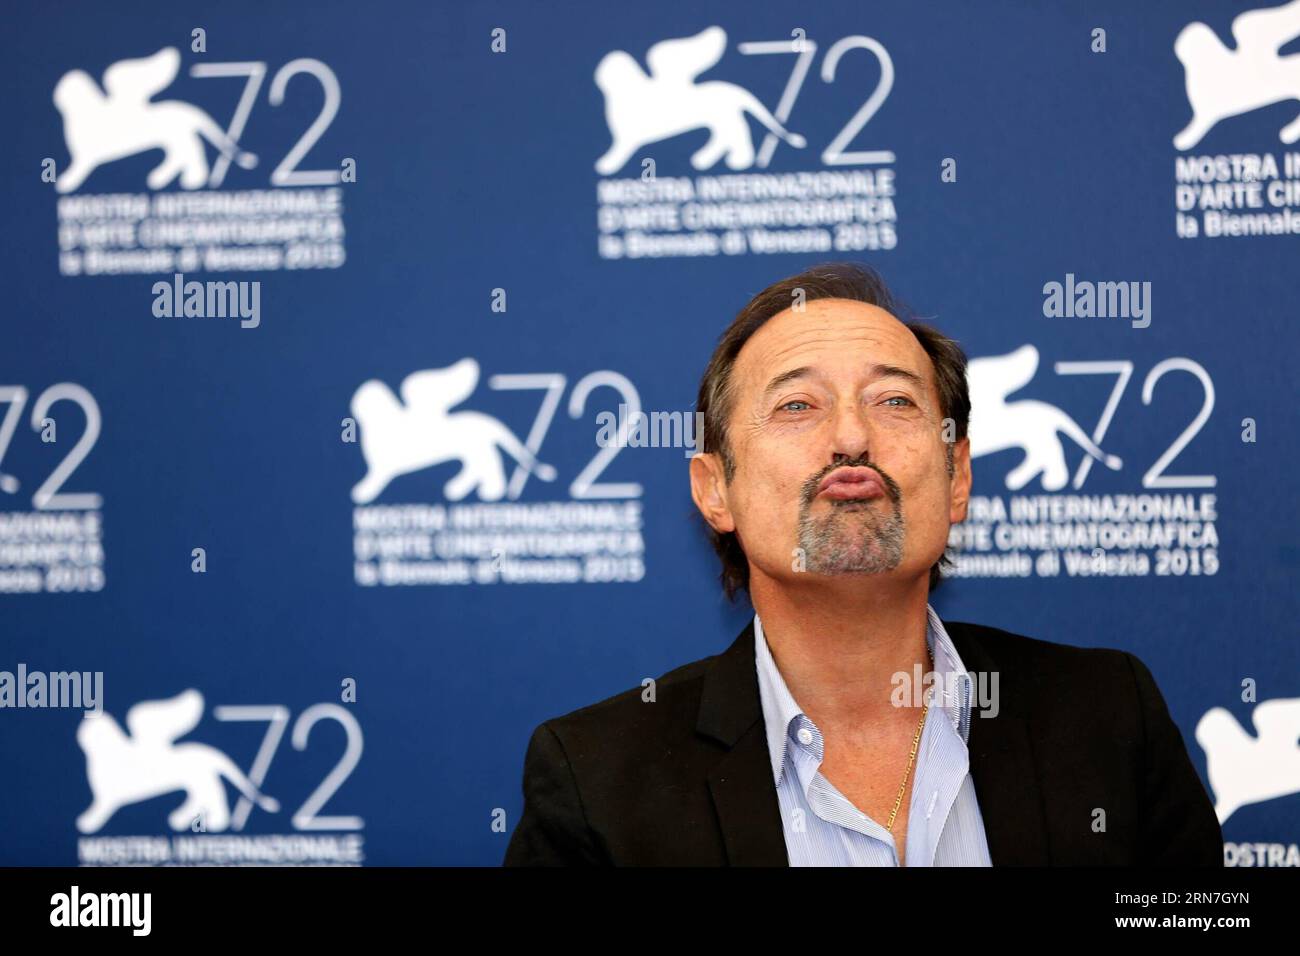 (150906) -- VENICE, Sept. 6, 2015 -- Actor Guillermo Francella attends the El Clan (The Clan) photocall during the 72nd Venice Film Festival at Palazzo del Casino in Venice, Italy, on September 6, 2015.) ITALY-VENICE-FILM-FESTIVAL-72ND-EL CLAN-PHOTOCALL JinxYu PUBLICATIONxNOTxINxCHN   150906 Venice Sept 6 2015 Actor Guillermo Francella Attends The El Clan The Clan photo call during The 72nd Venice Film Festival AT Palazzo Del Casino in Venice Italy ON September 6 2015 Italy Venice Film Festival 72nd El Clan photo call JinxYu PUBLICATIONxNOTxINxCHN Stock Photo